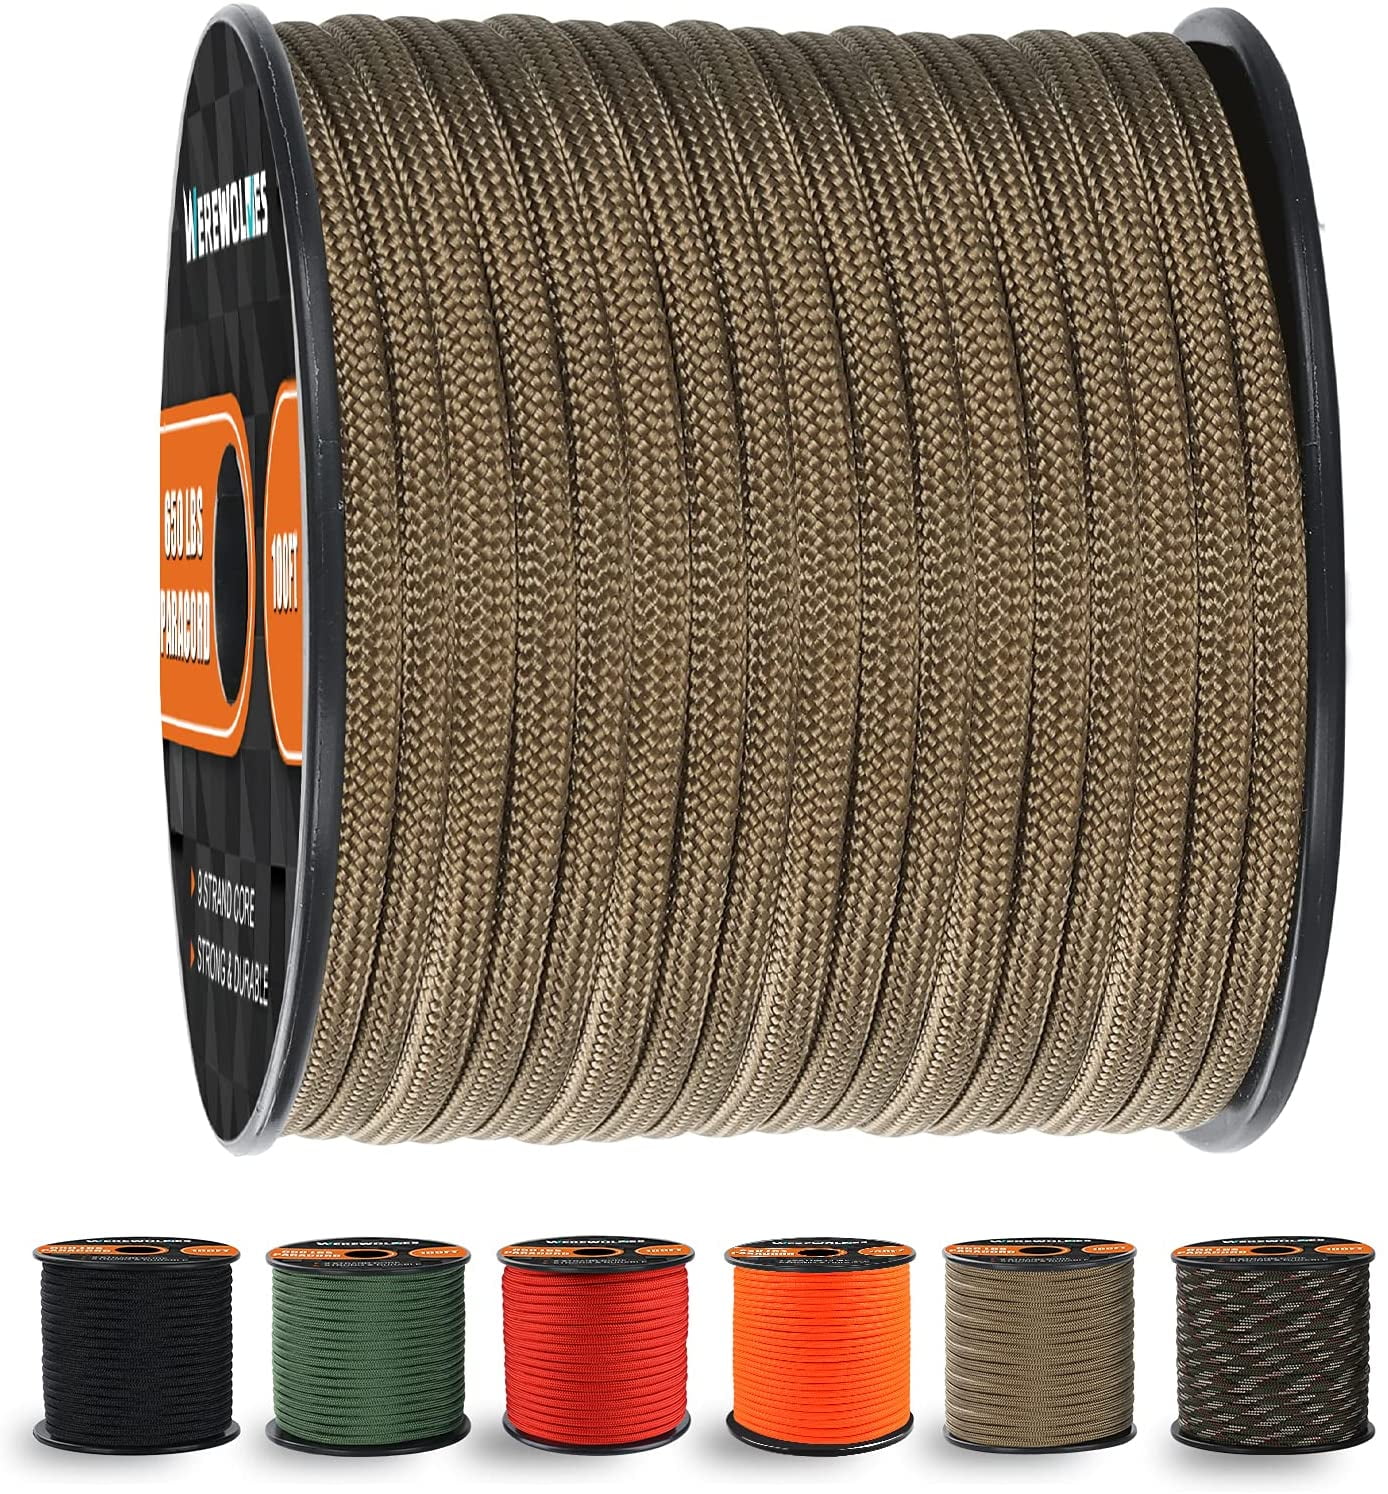 200' Spools of Parachute Cord 100' Hiking and Survival Type III Paracord for Camping WEREWOLVES 650lb Paracord/Parachute Cord 9 Strand Paracord Rope 